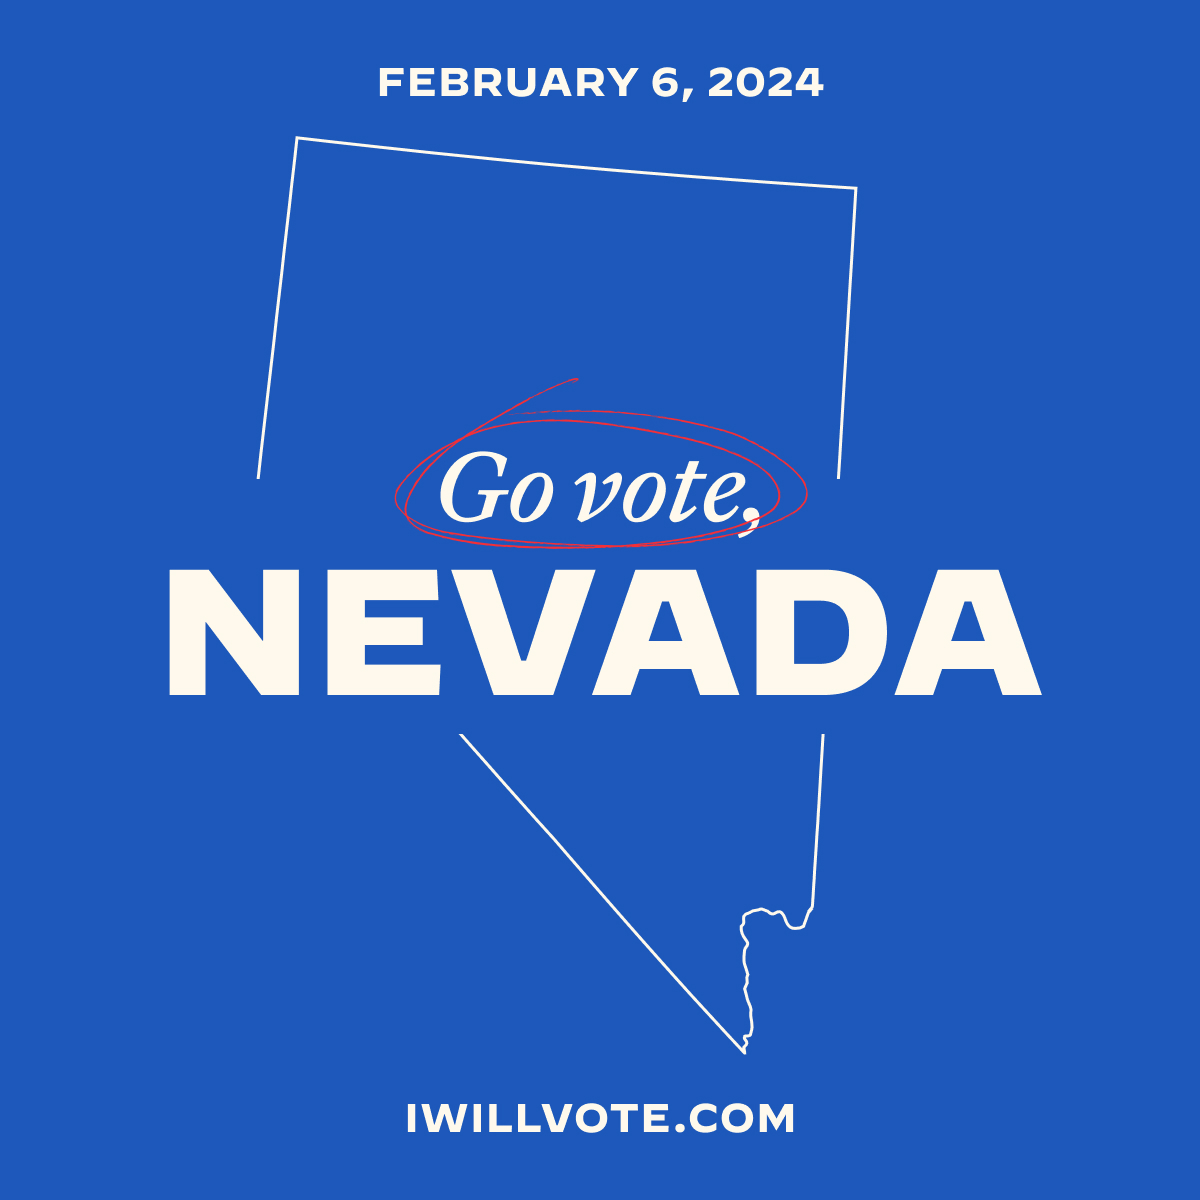 Today’s the day, Nevada! There is too much at stake to sit this primary out. Go to IWillVote.com/NV to confirm your polling location.